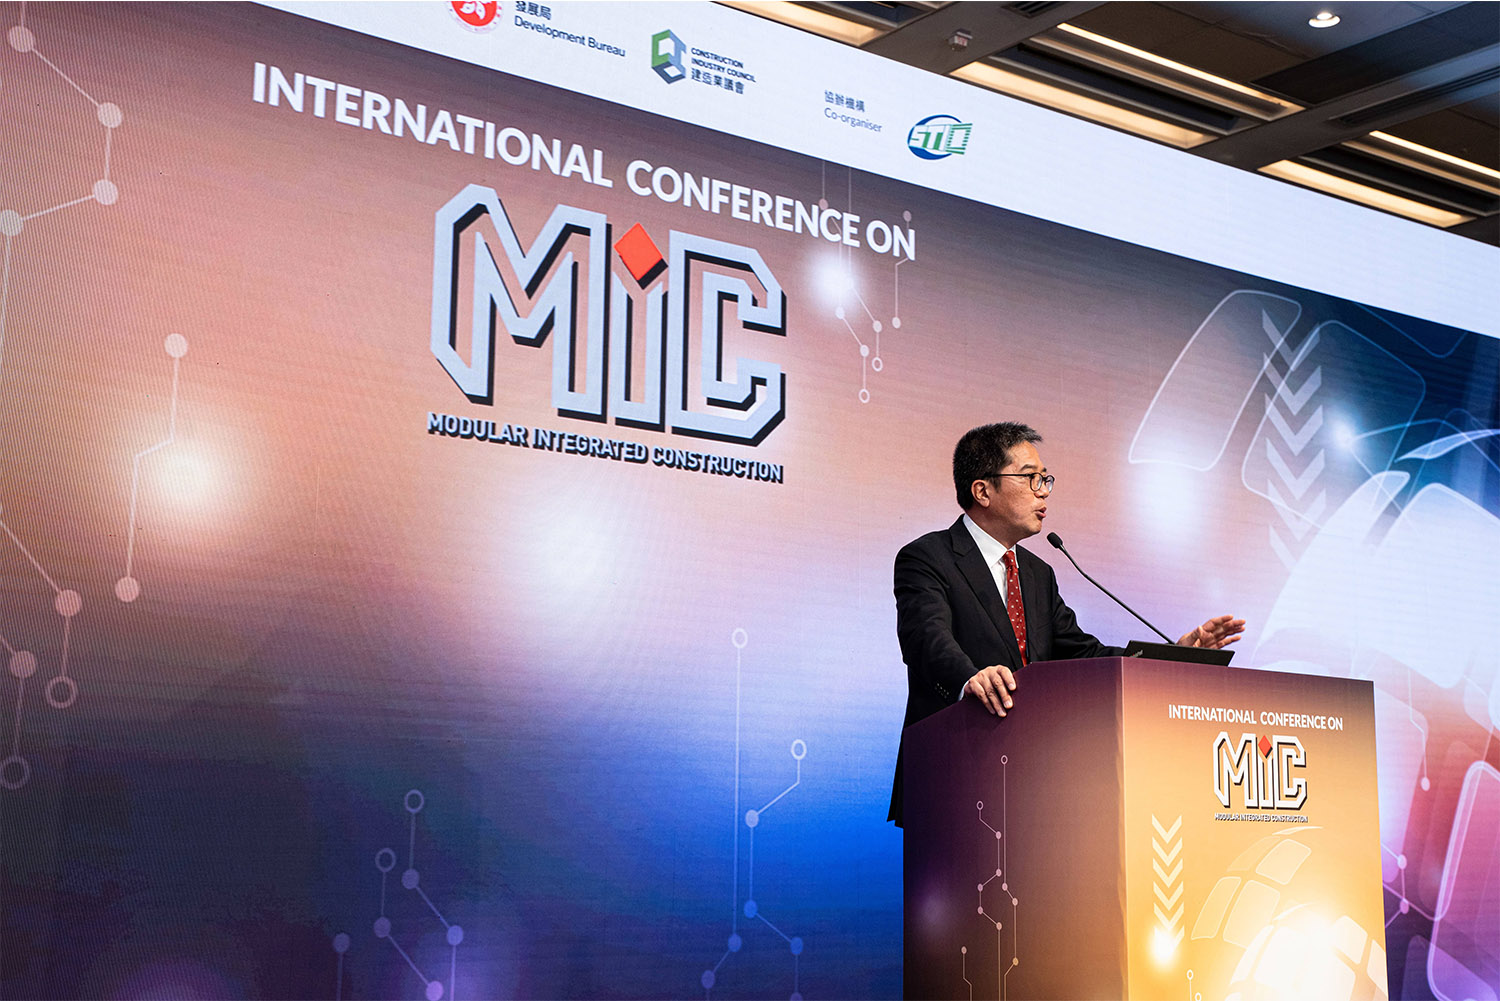 CIC MiC Events CIExpo International Conference on MiC